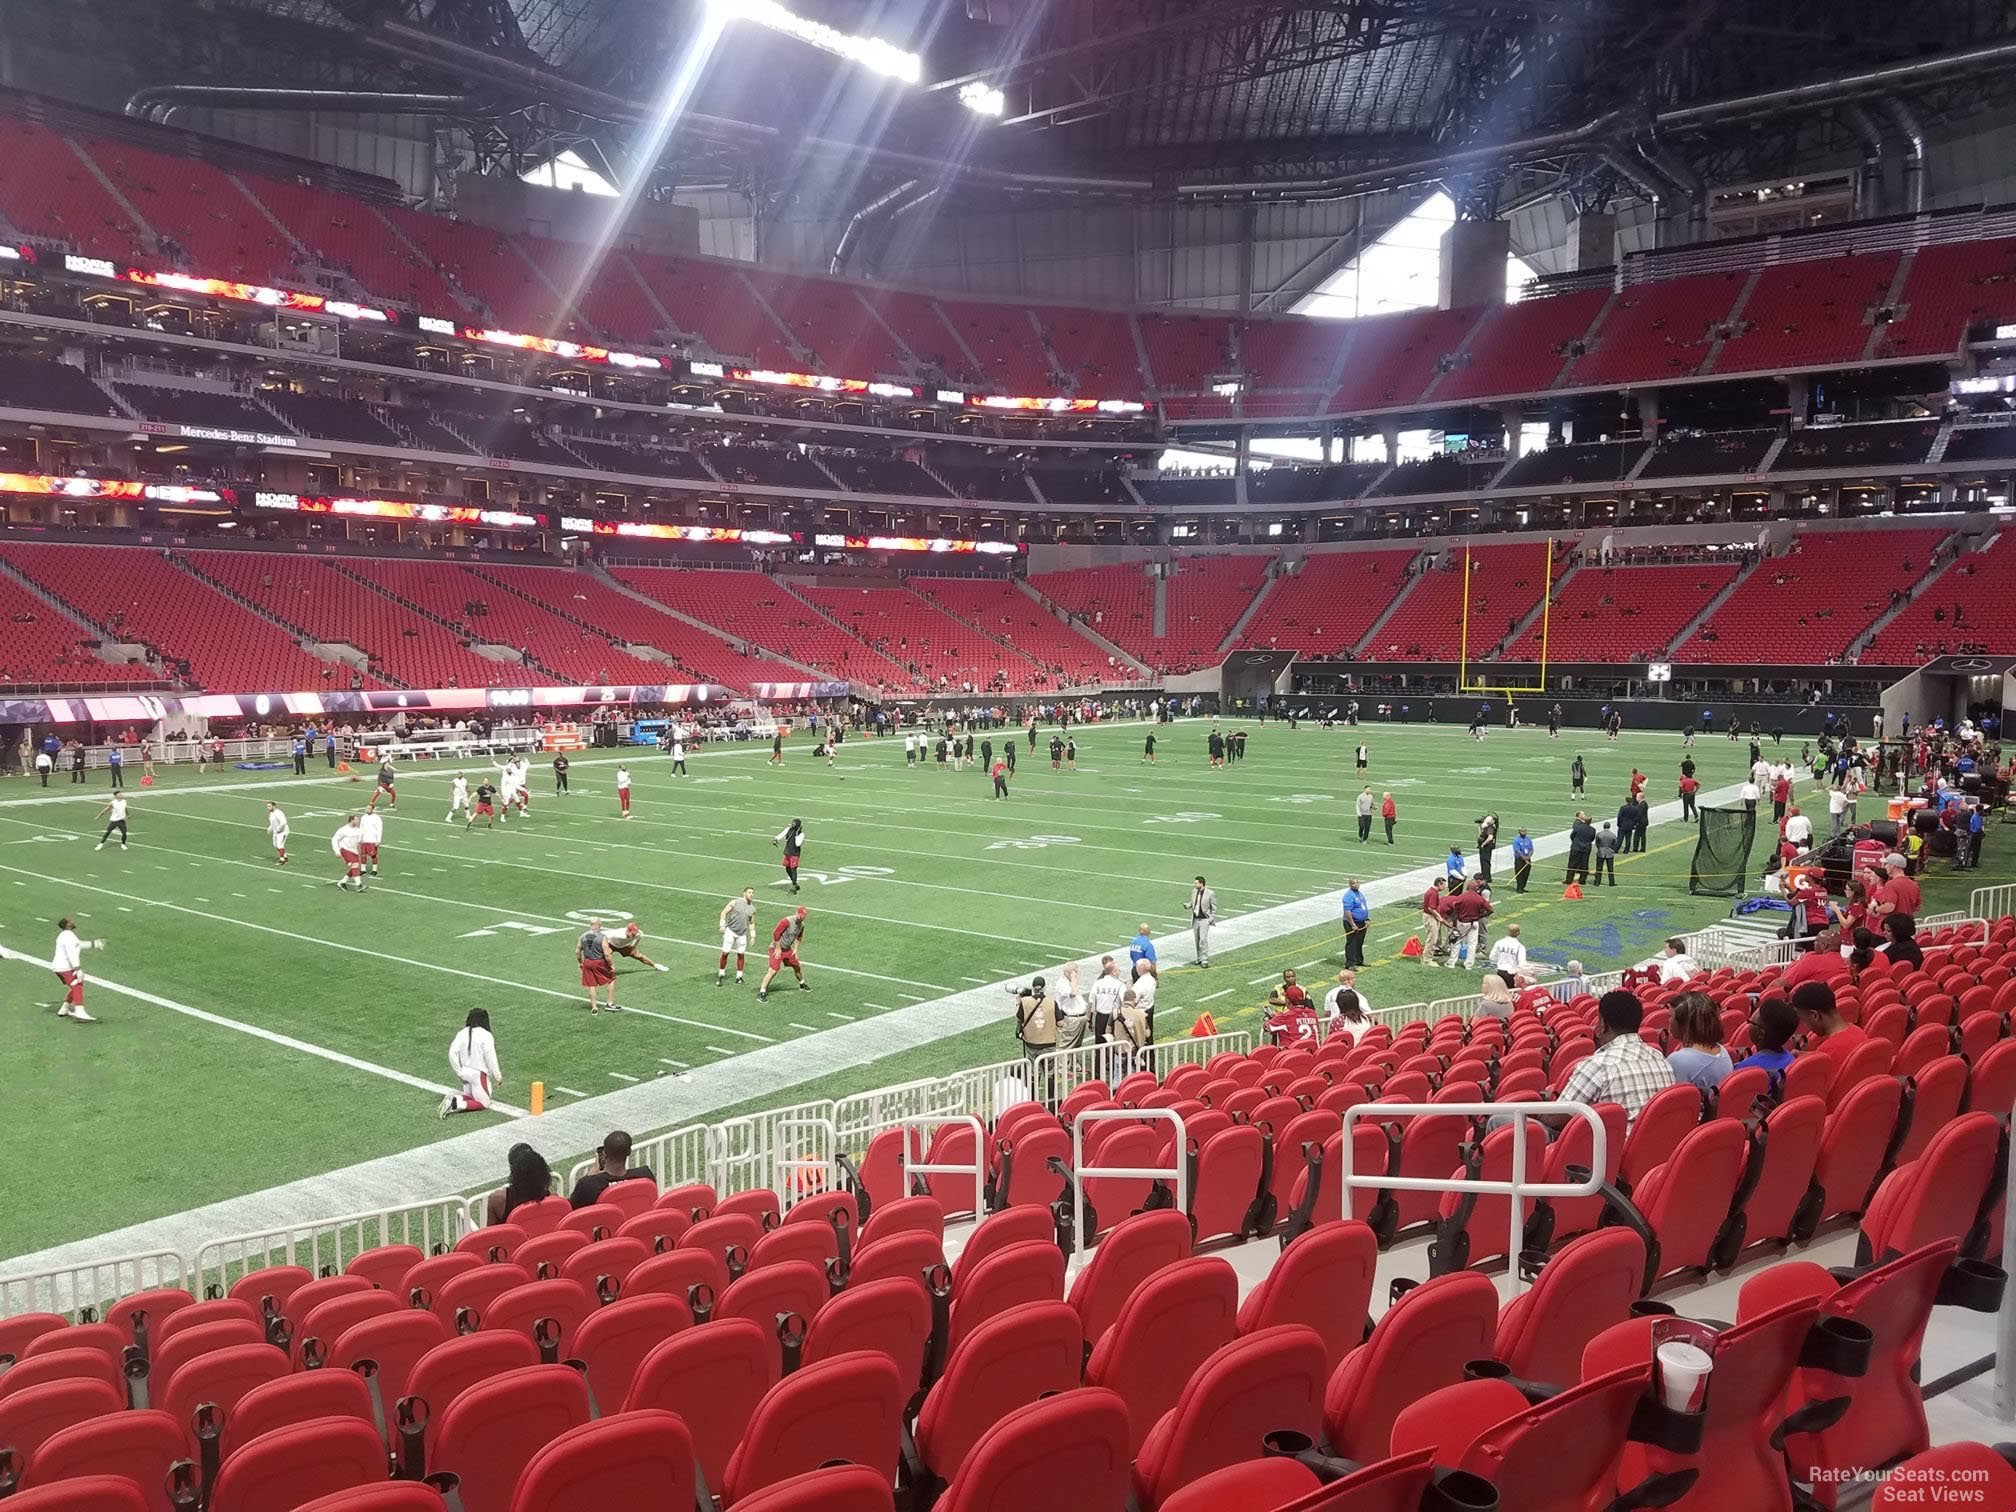 section 133, row 15 seat view  for football - mercedes-benz stadium